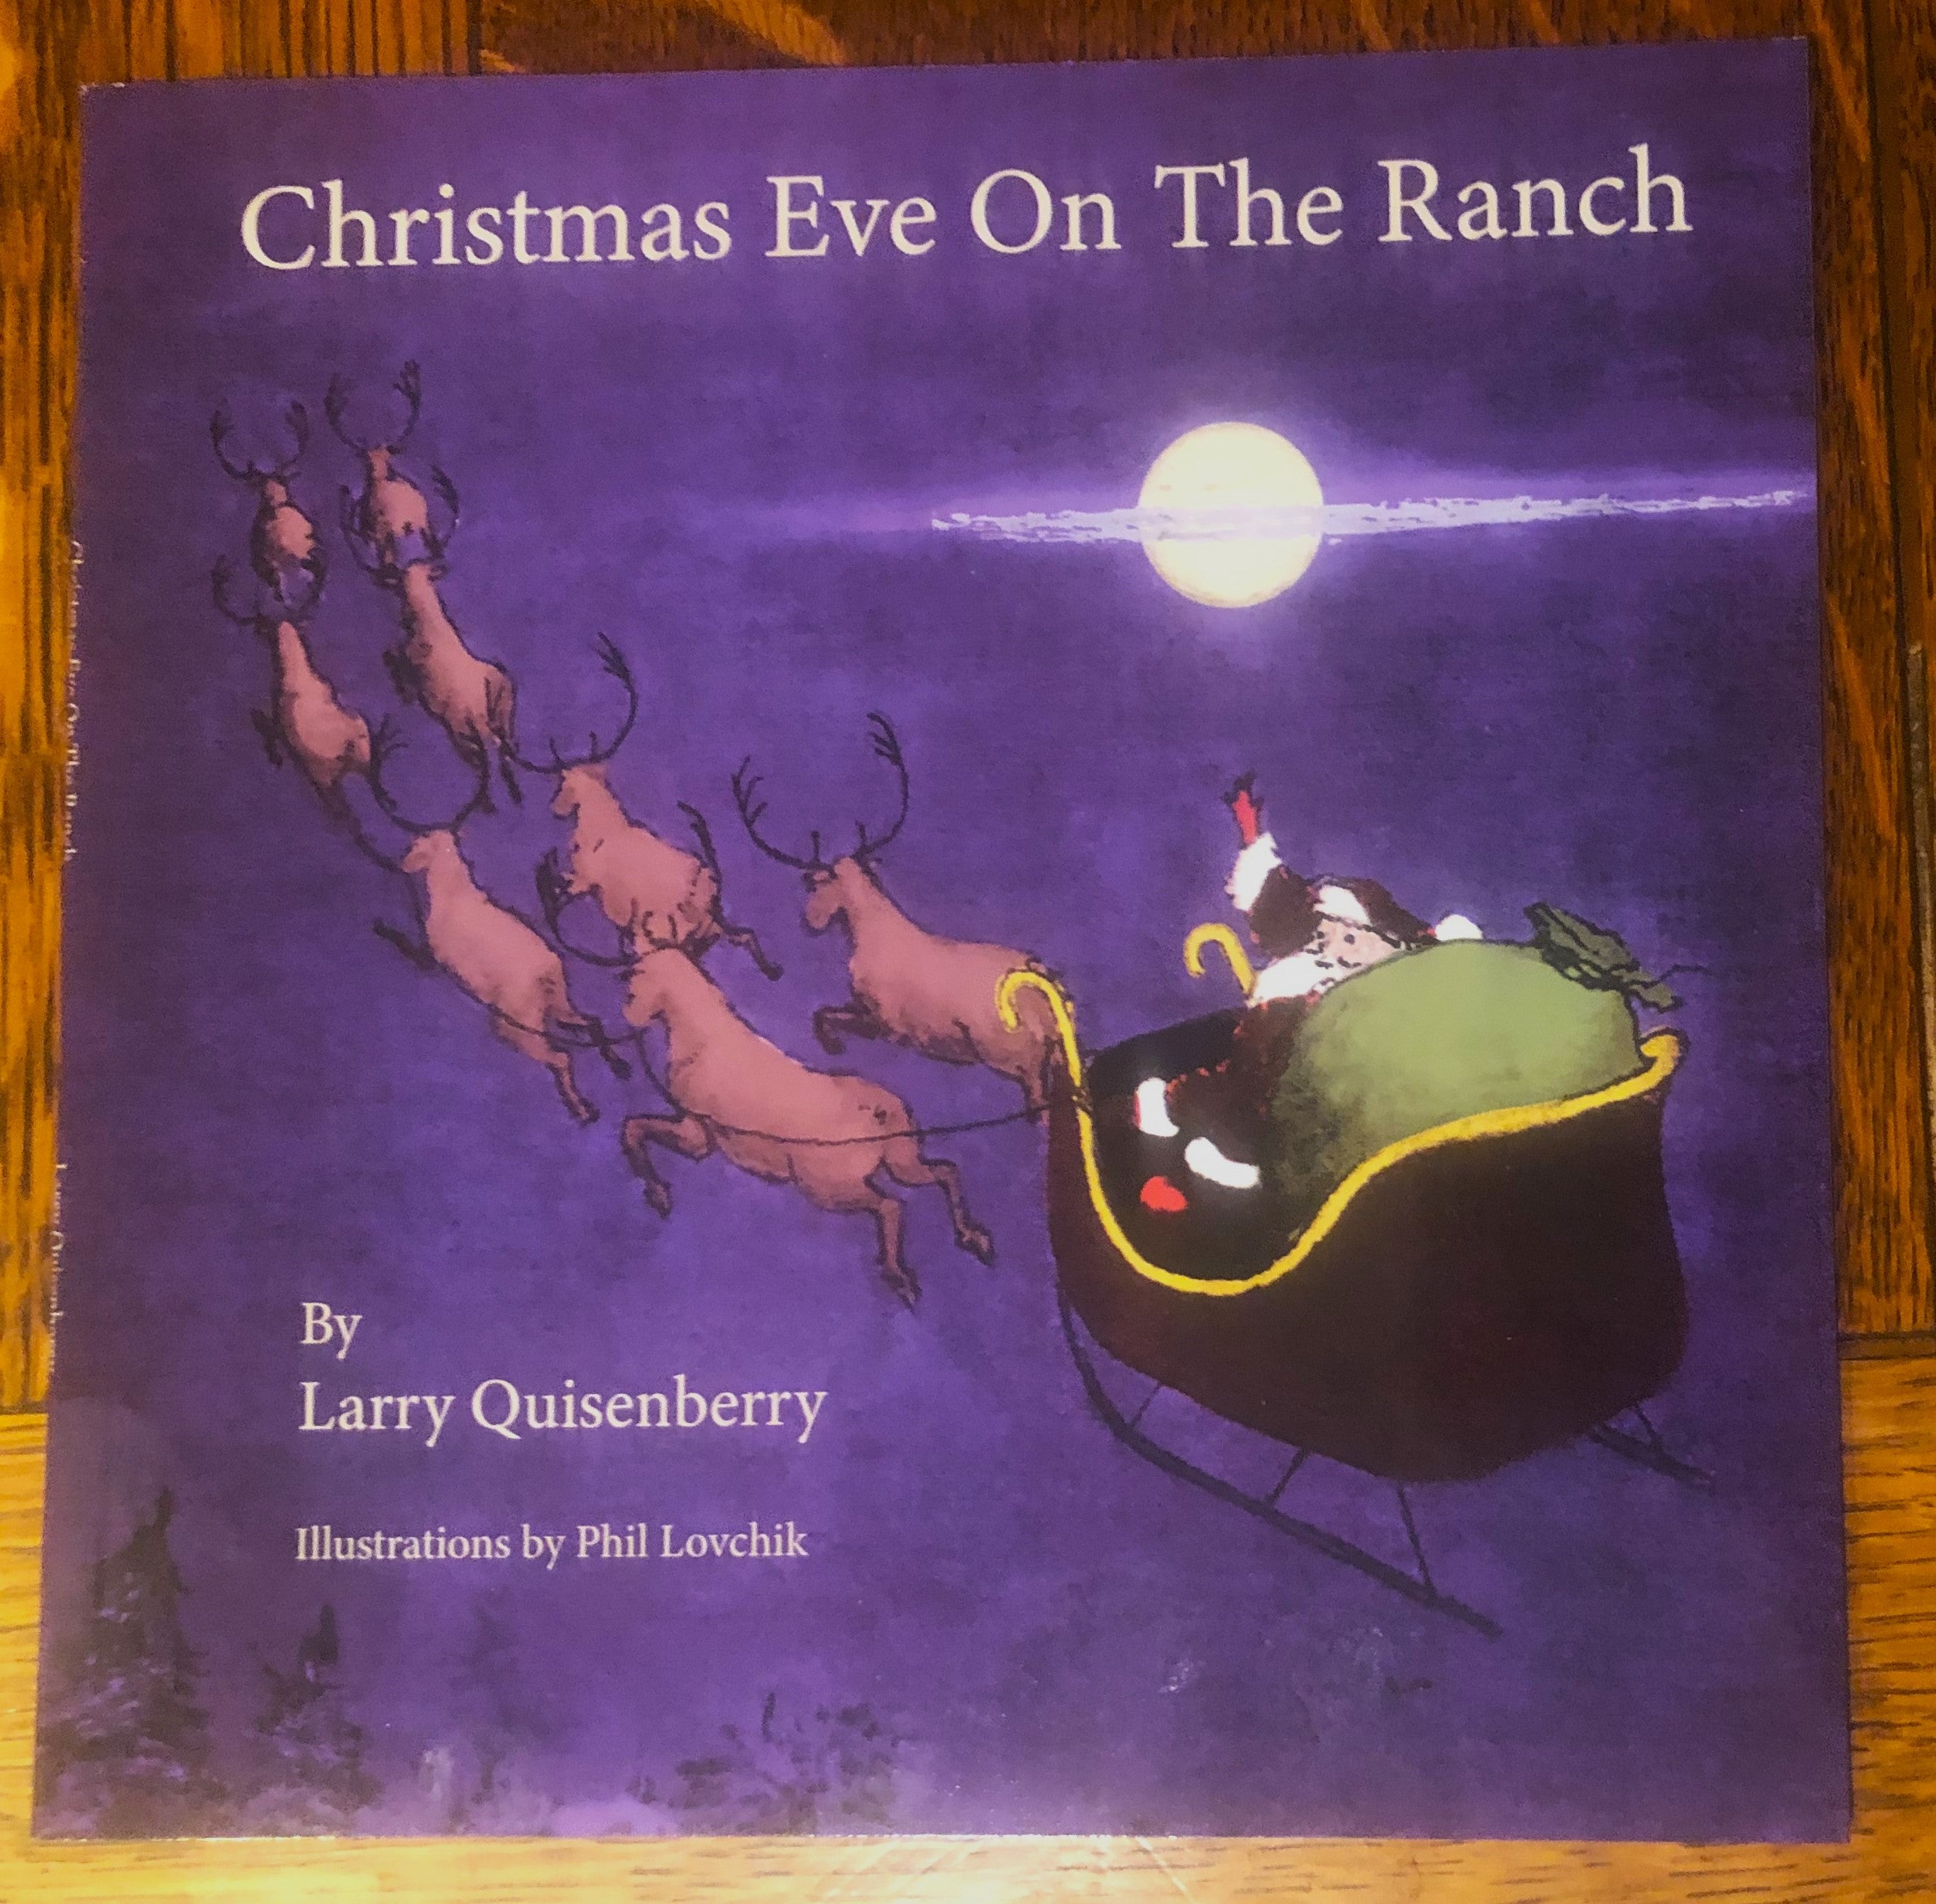 BOOKS - "Christmas Eve on the Ranch"  by Larry Quisenberry